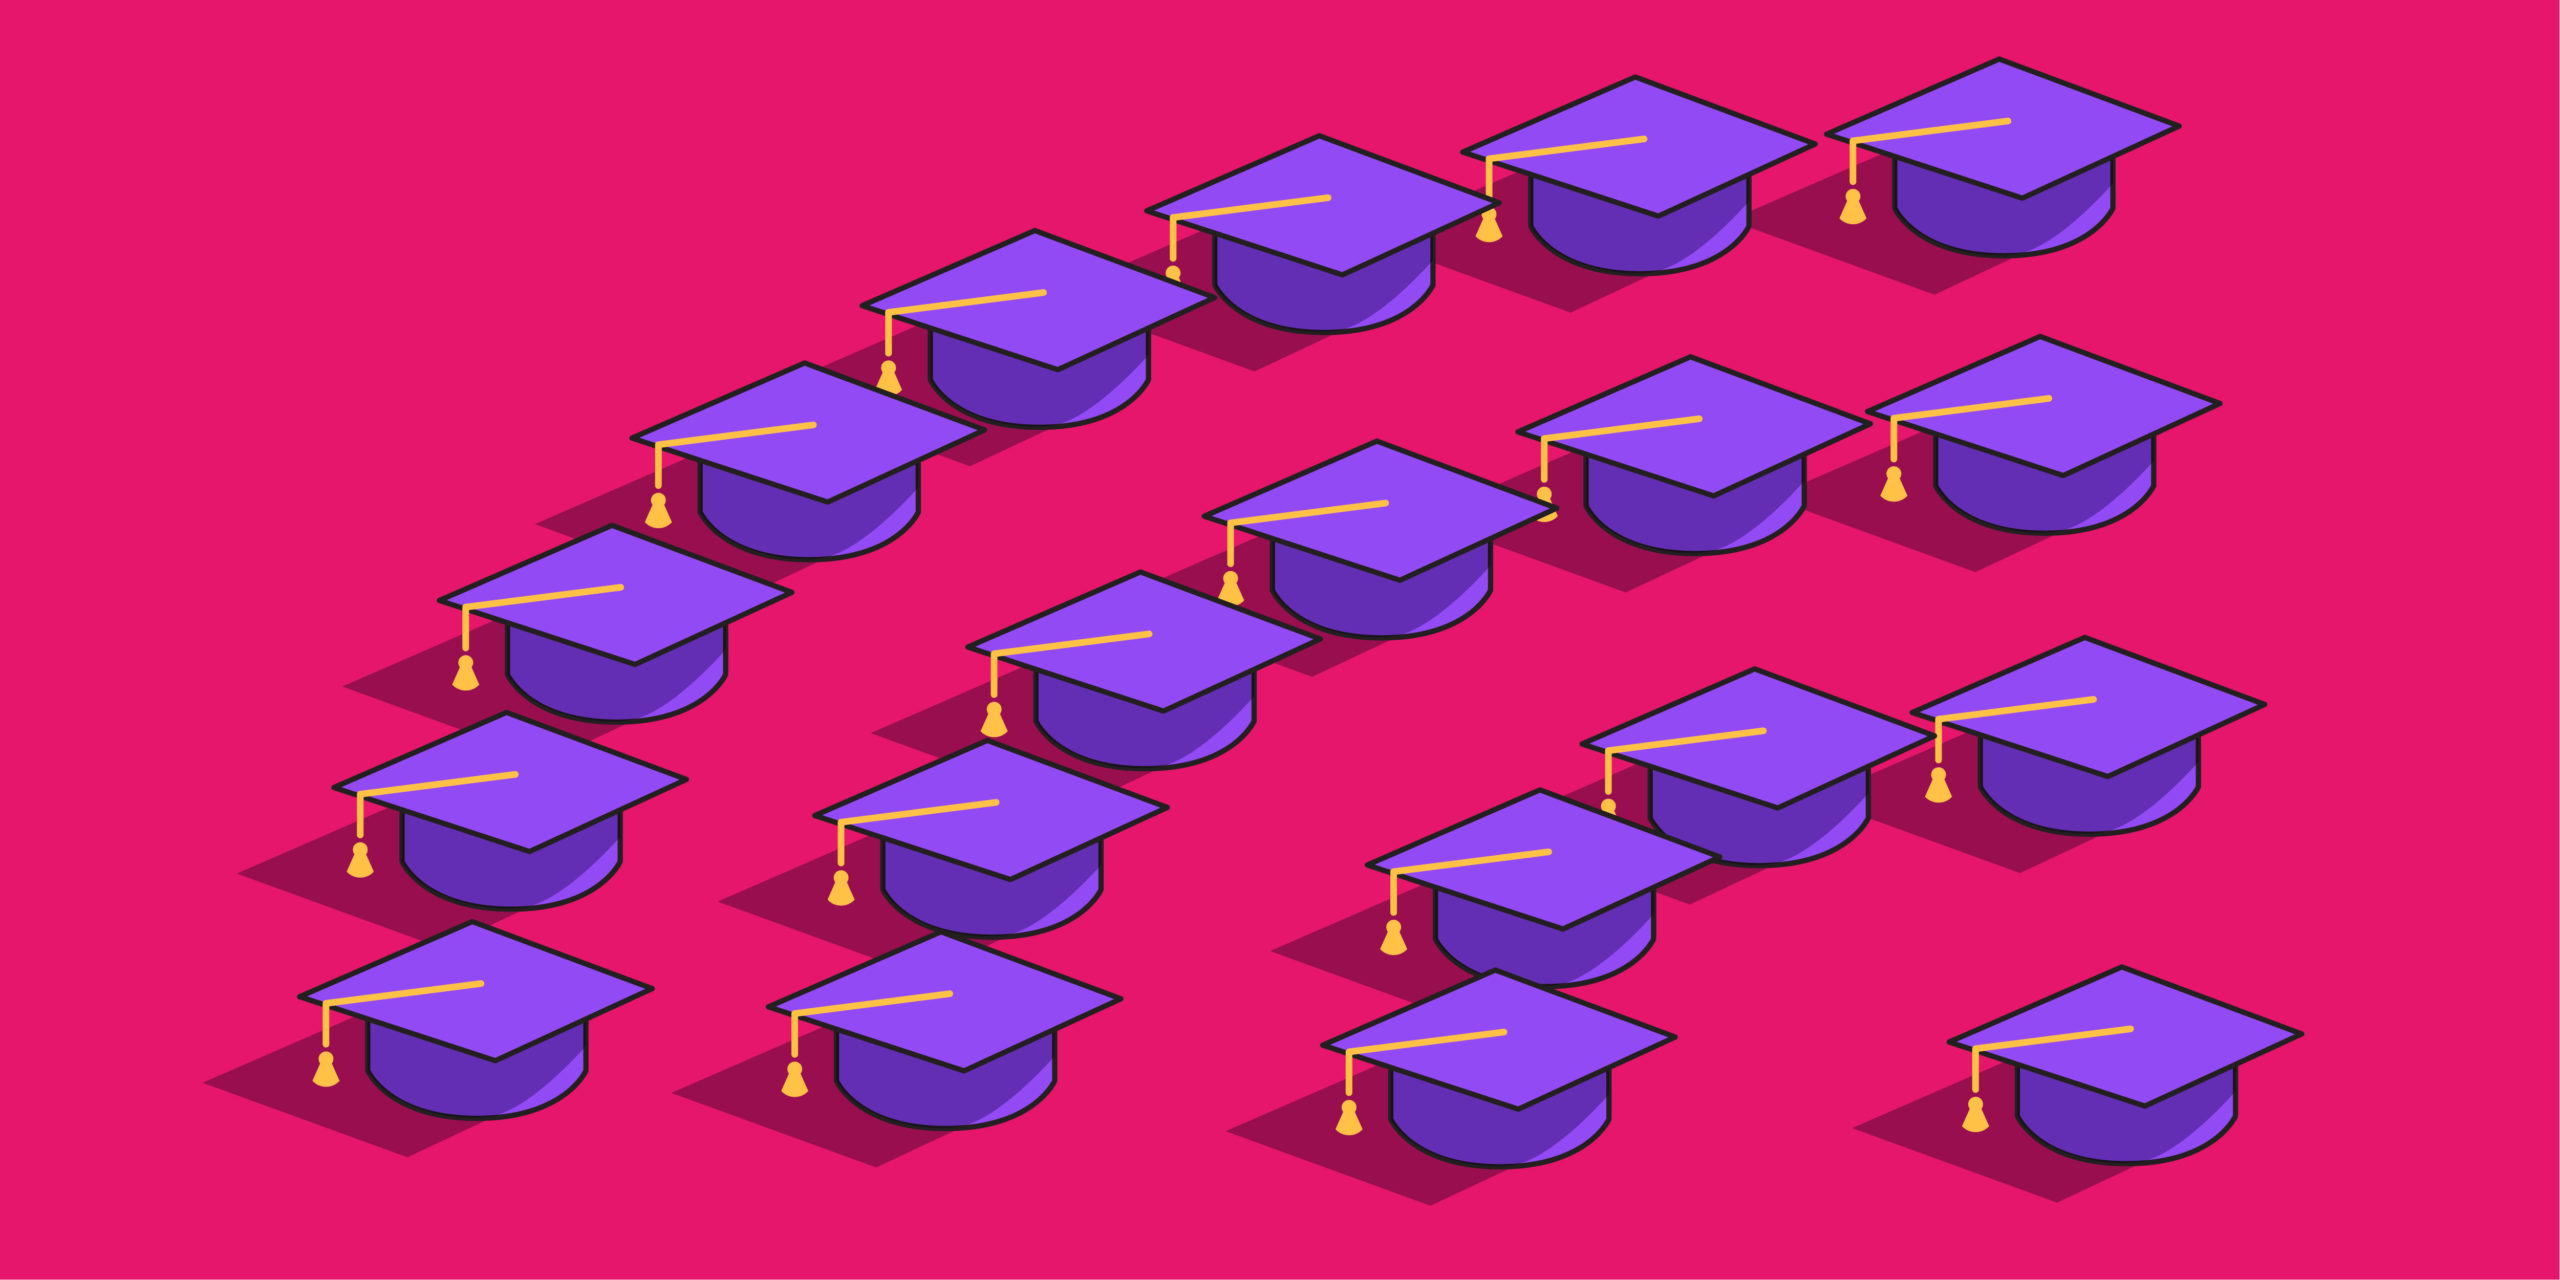 Purple mortarboards arranged in a pyramid shape on a pink background